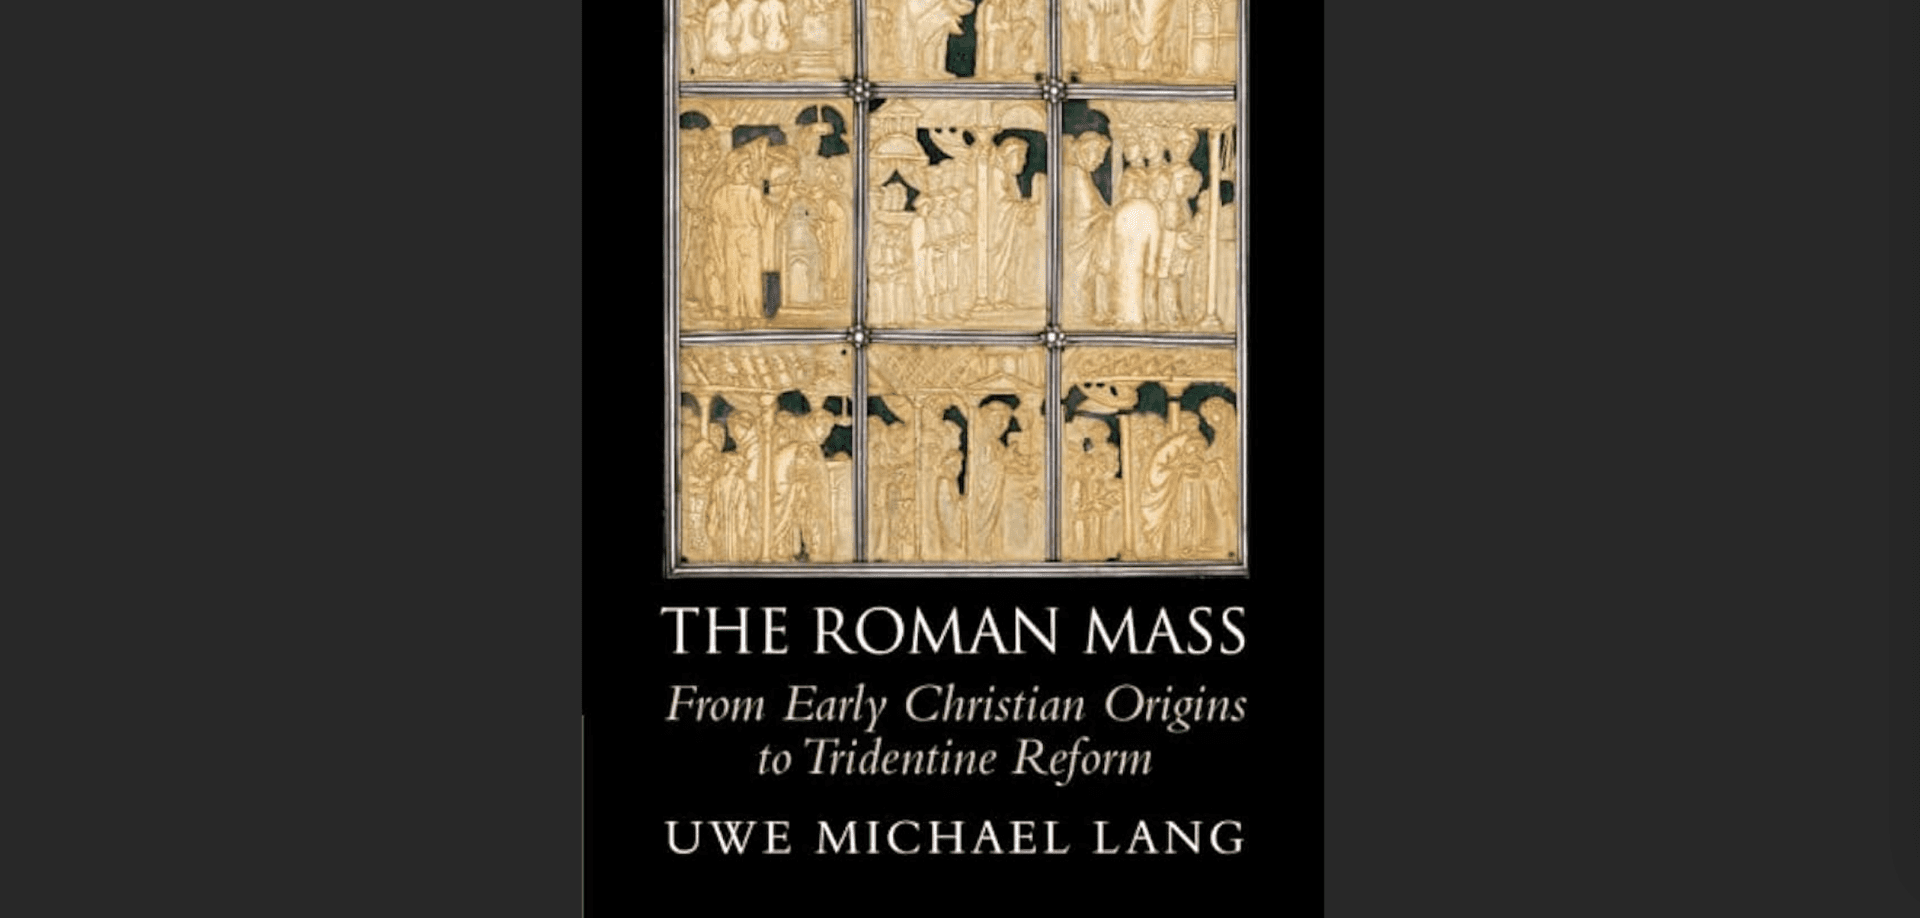 New Book Offers Concise yet Detailed History of the Mass